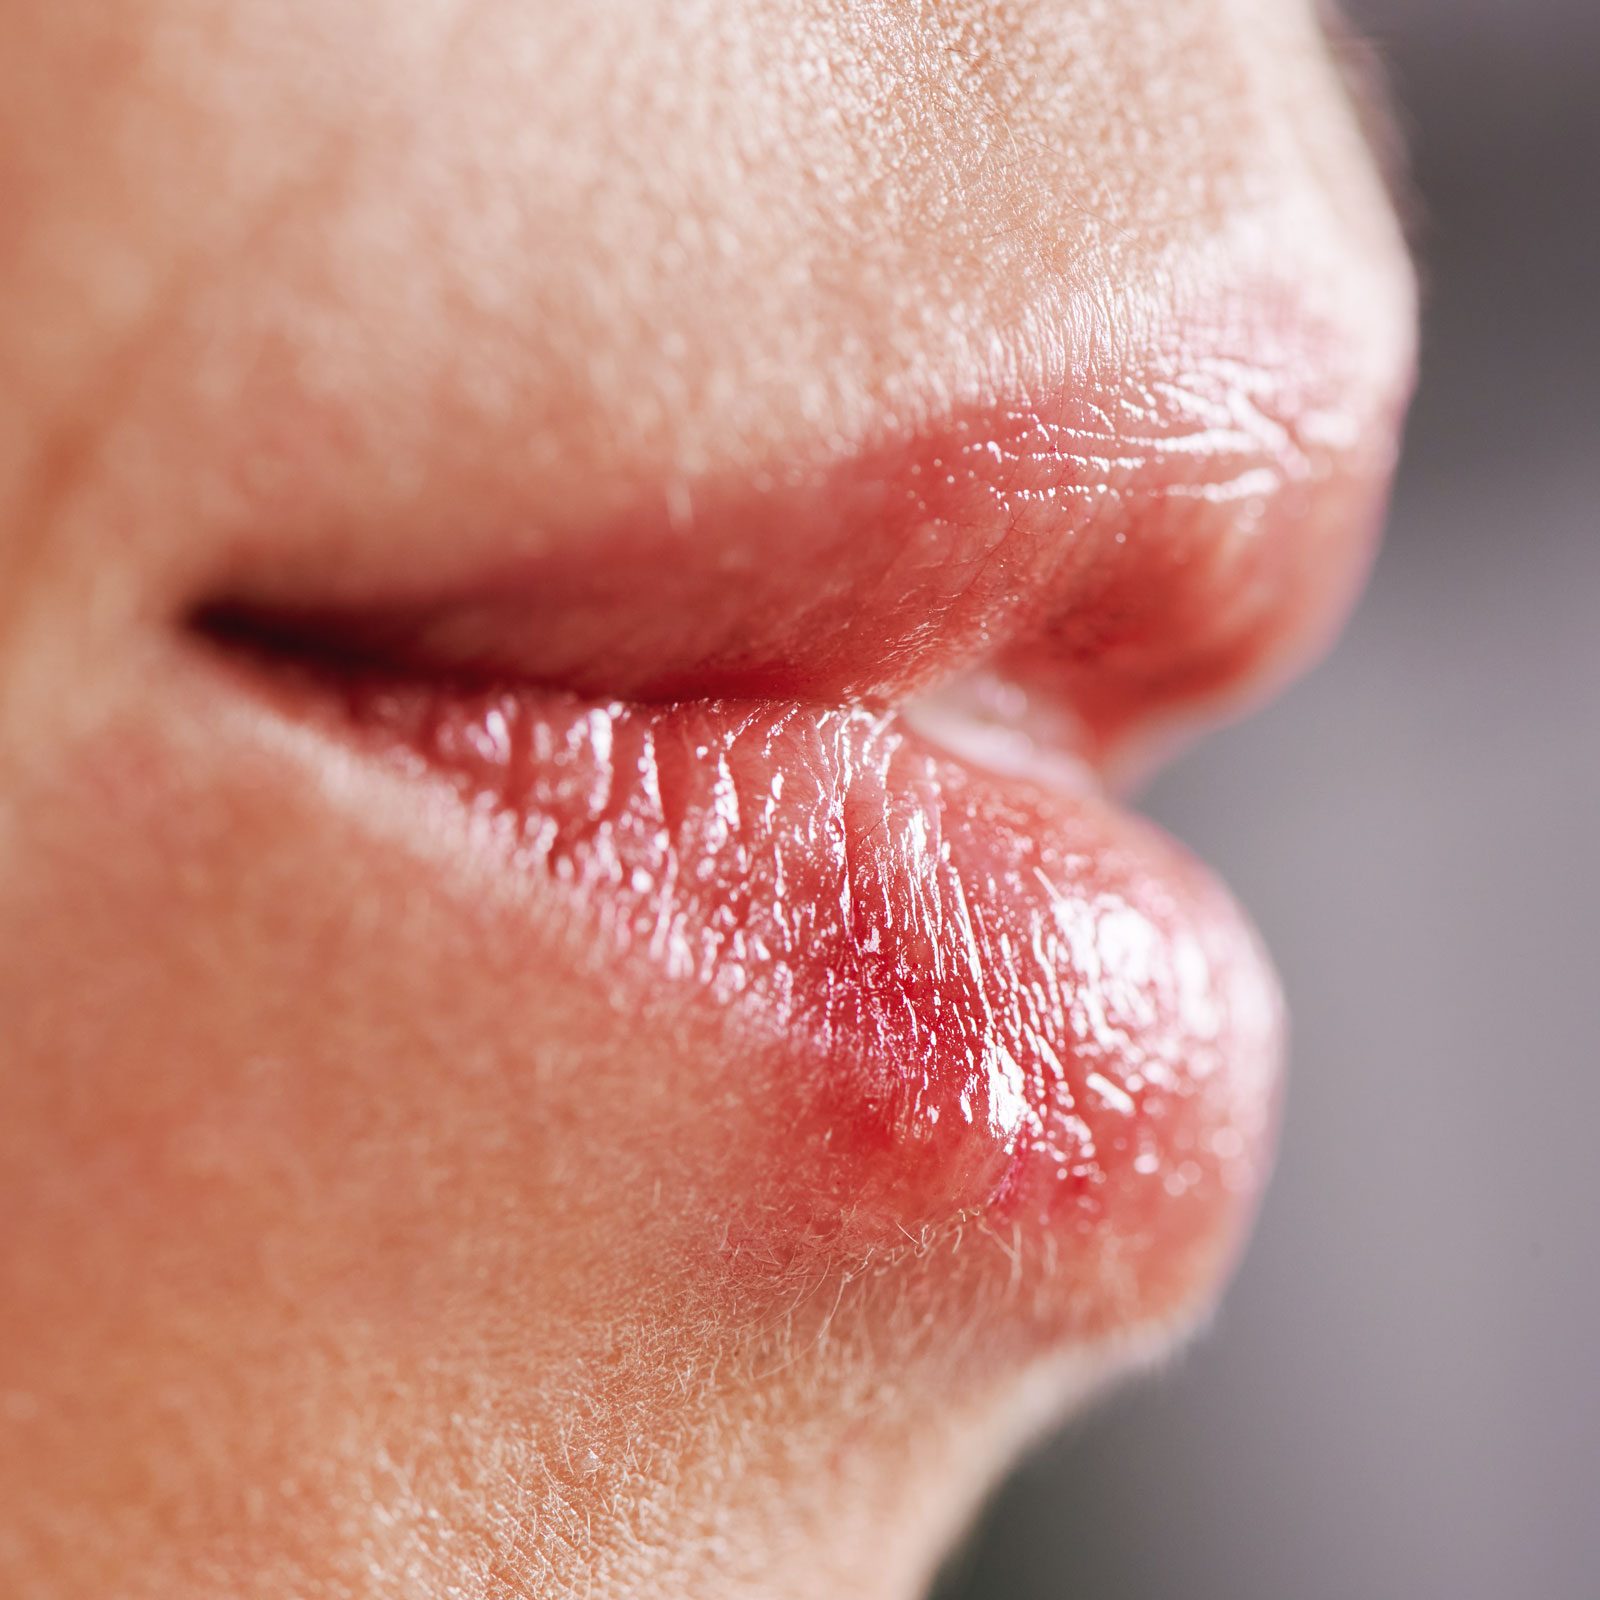 Sunburned Lips? Here's What Doctors Say You Should Do